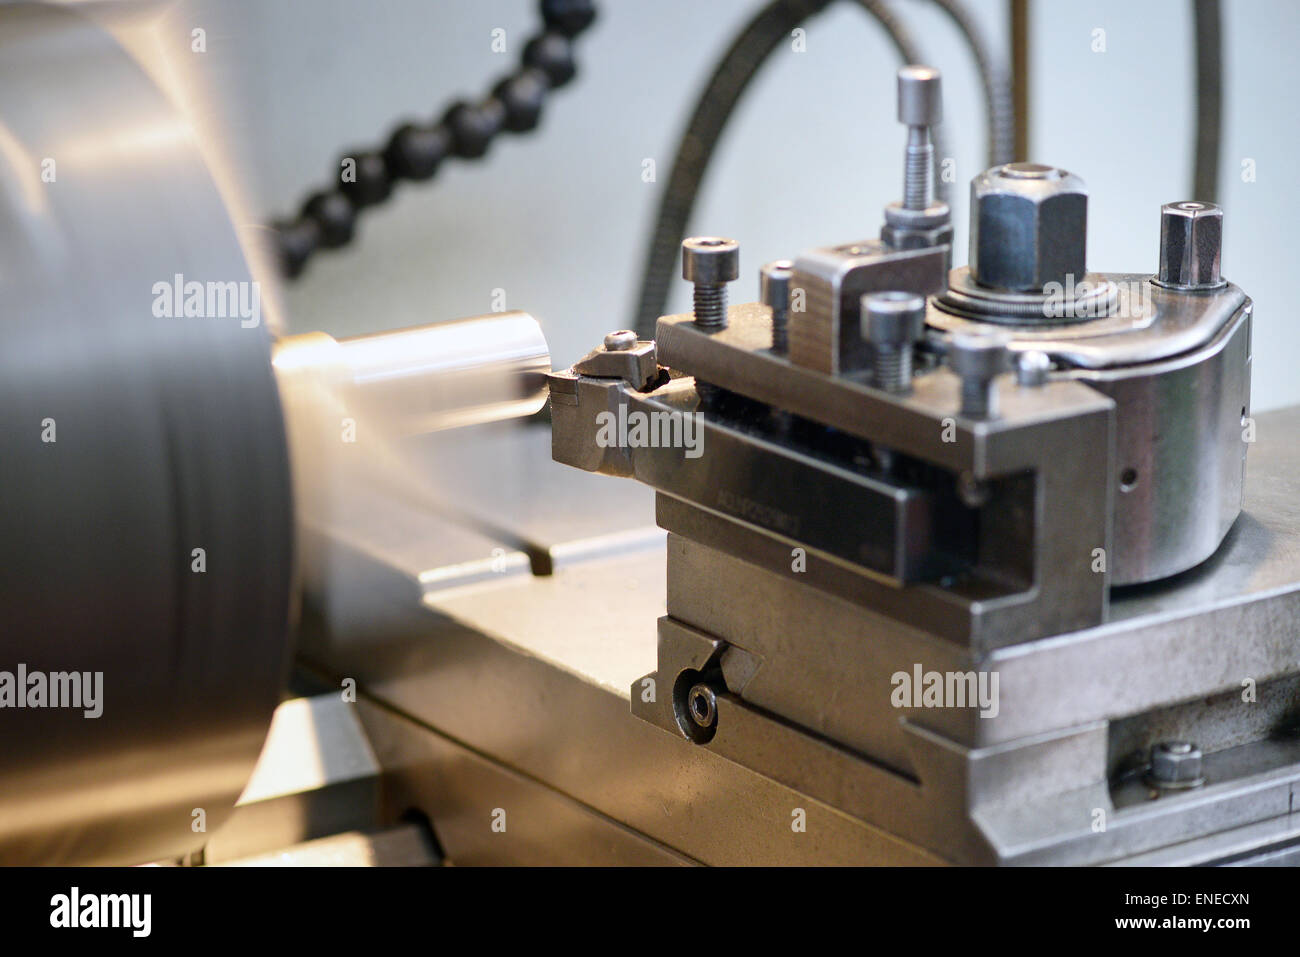 Close Up of Spinning Lathe Machine in Operation, Focus on Individual Components Stock Photo